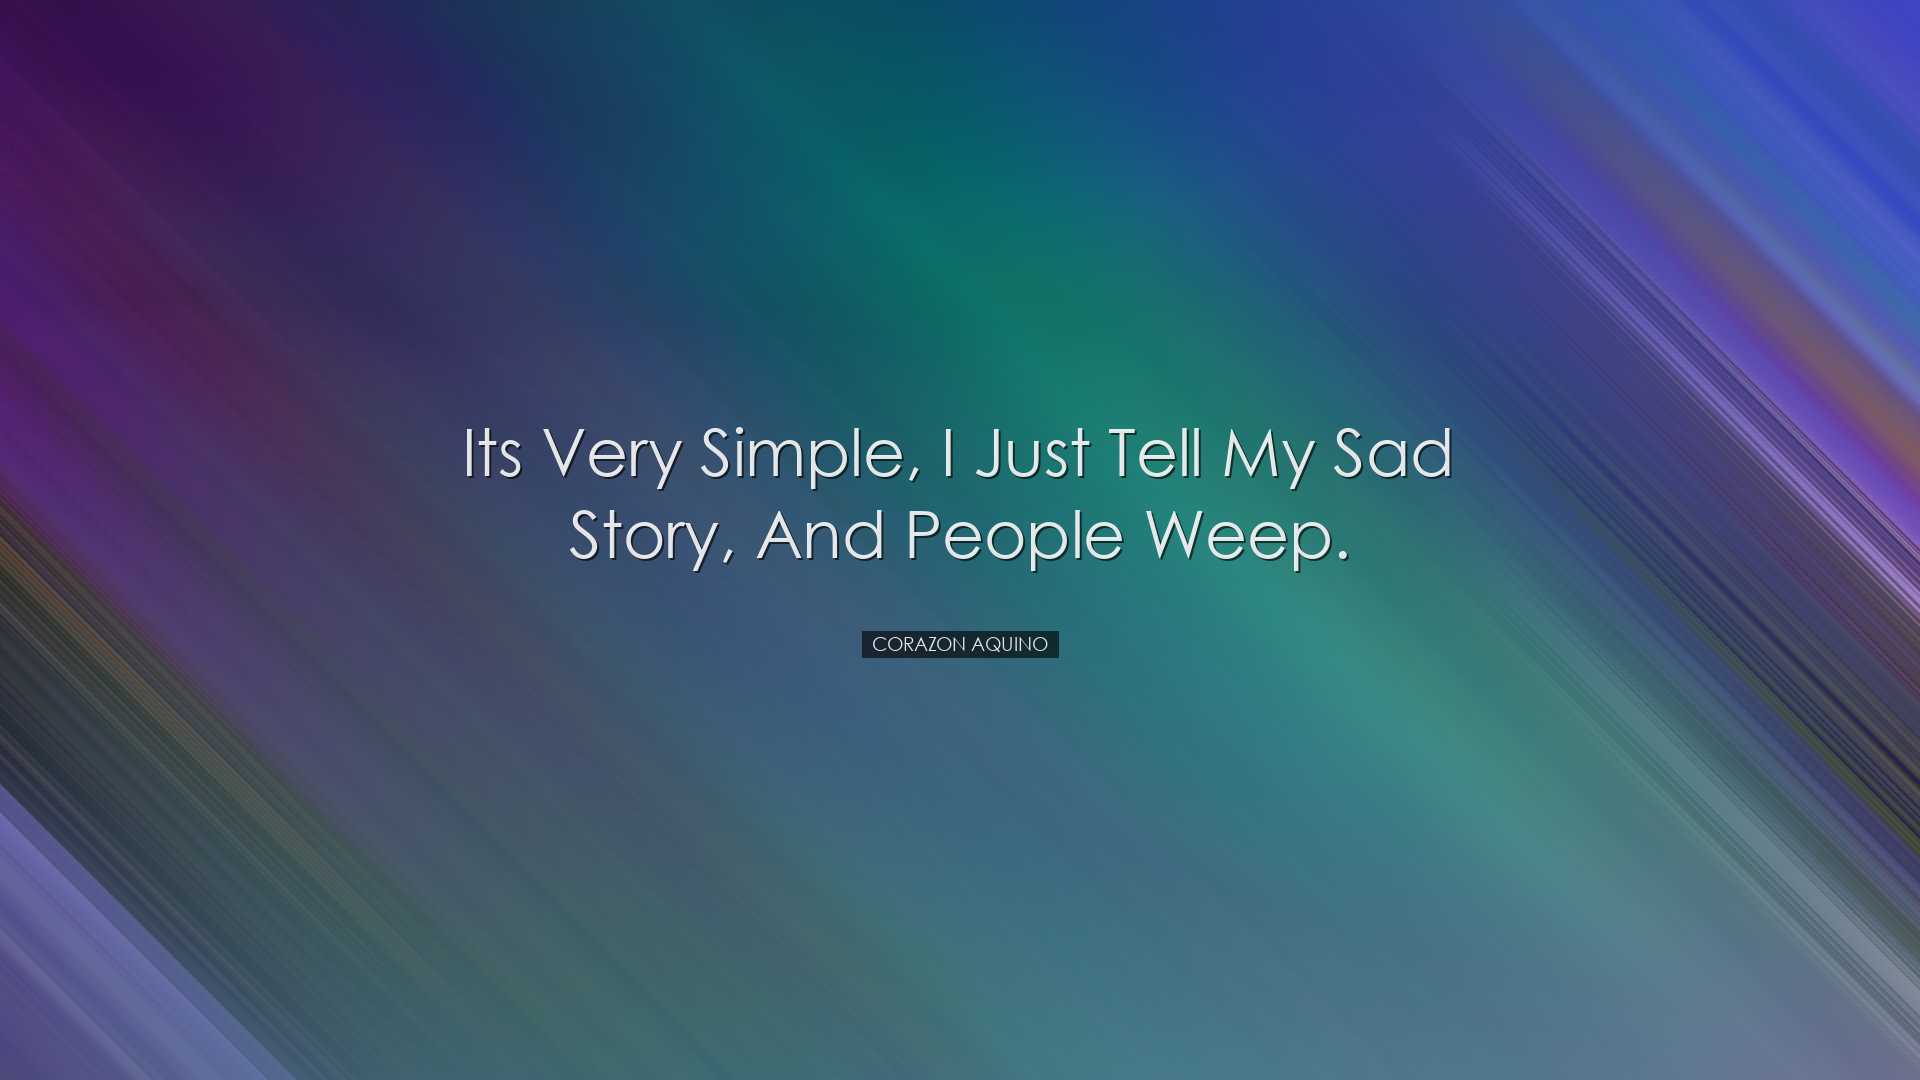 Its very simple, I just tell my sad story, and people weep. - Cora